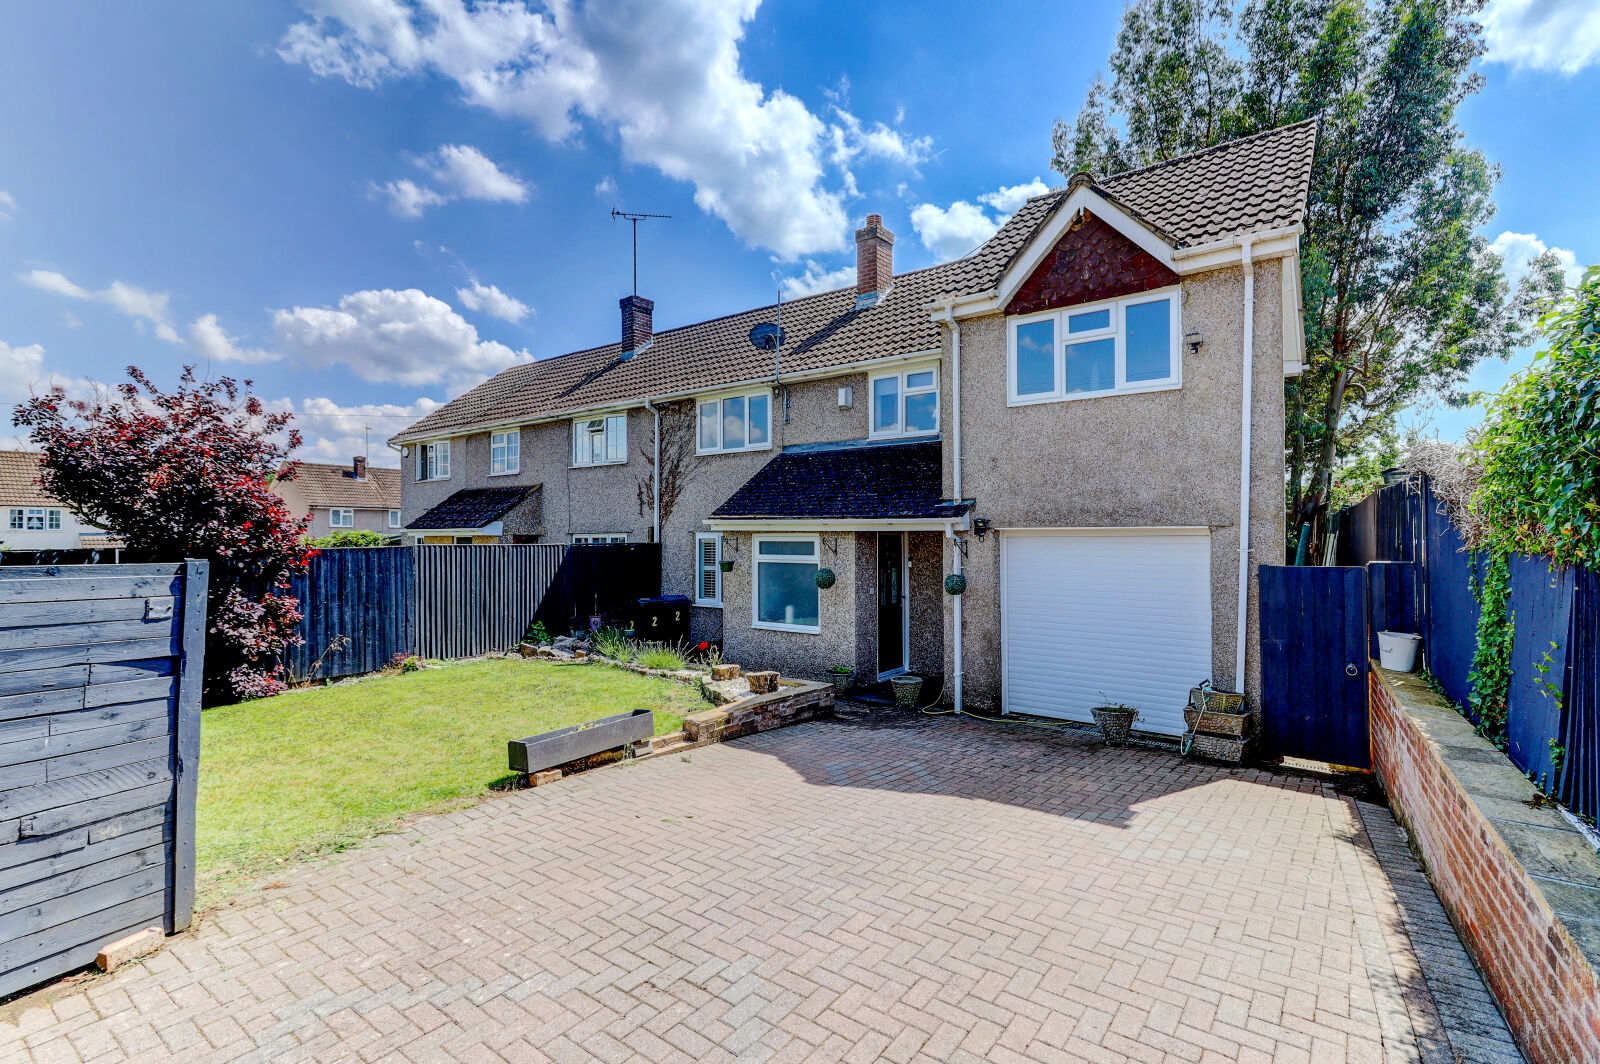 4 bedroom semi detached house for sale Coronation Crescent, High Wycombe, HP14, main image